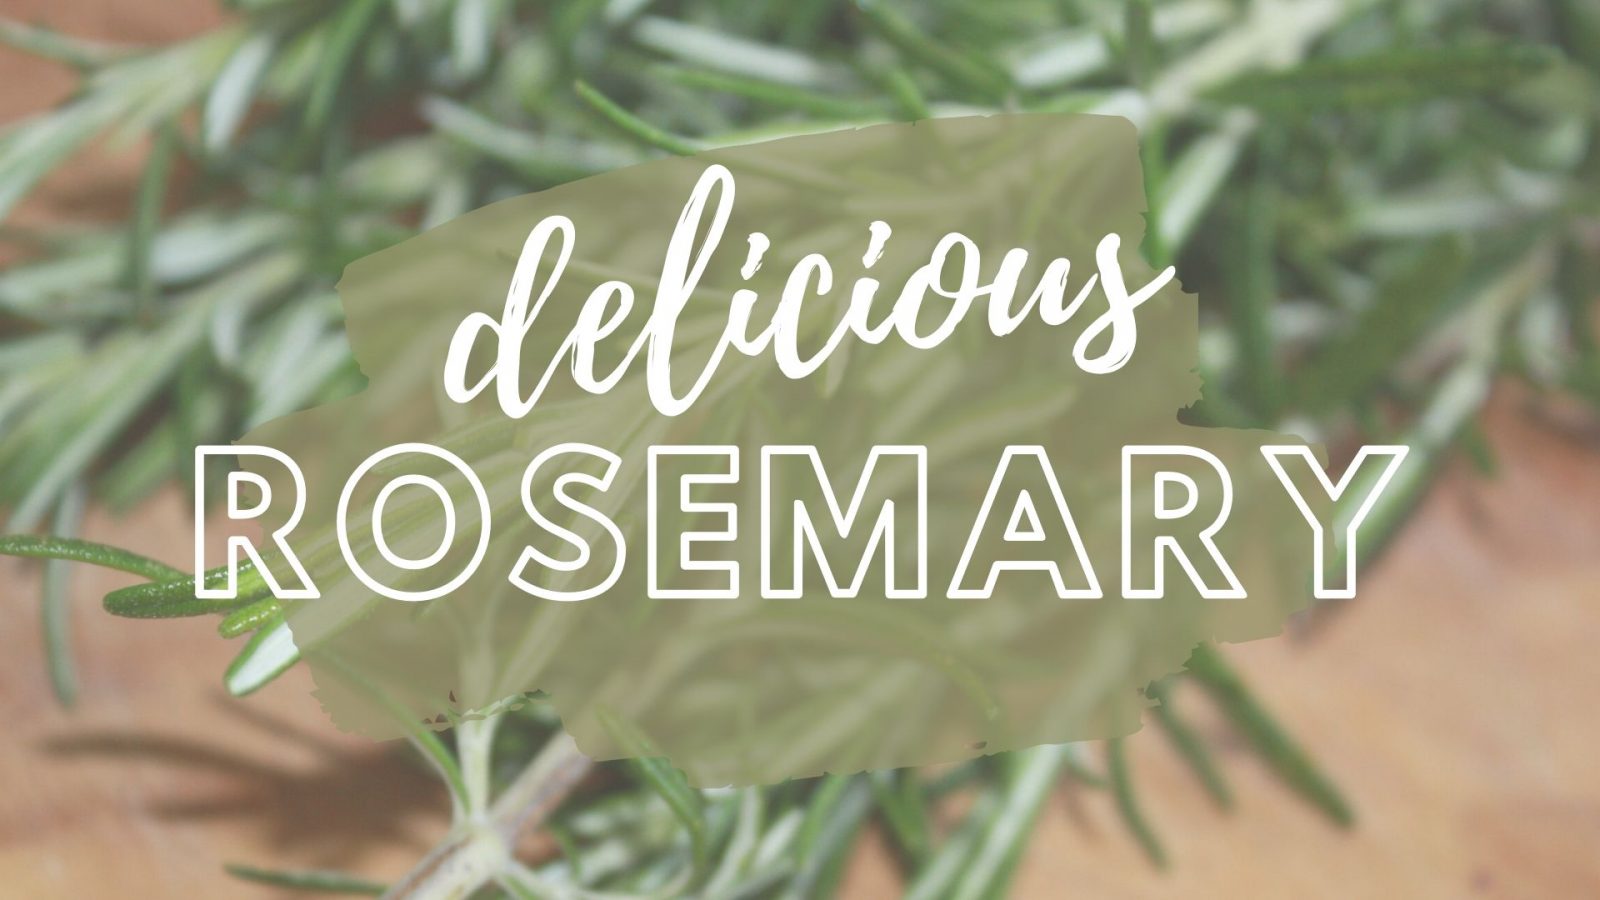 7 Delicious Things To Do With Rosemary